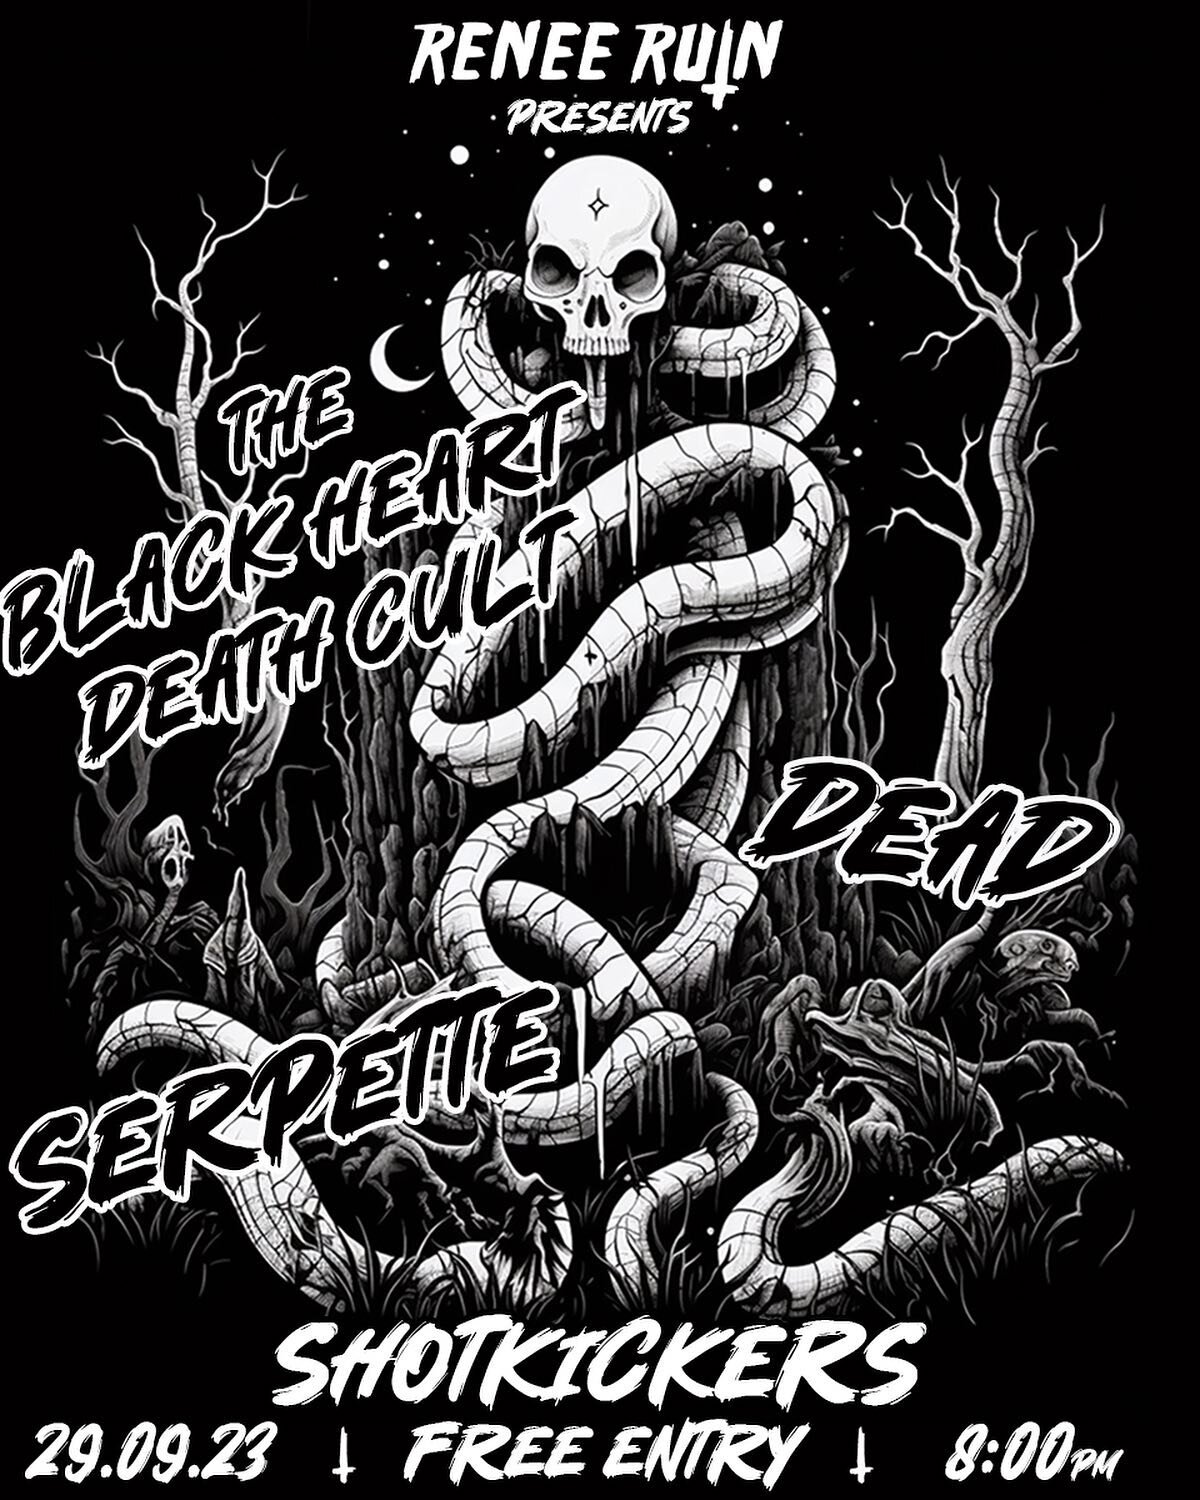 Super excited to announce I&rsquo;ve joined forces with @shotkickersmelb to put on a killer show filled with an equally killer lineup to celebrate my inaugural date of birth!! 

Friday, September 29th 8pm! FREE ENTRY! 

SERPETTE, DEAD &amp; THE BLACK